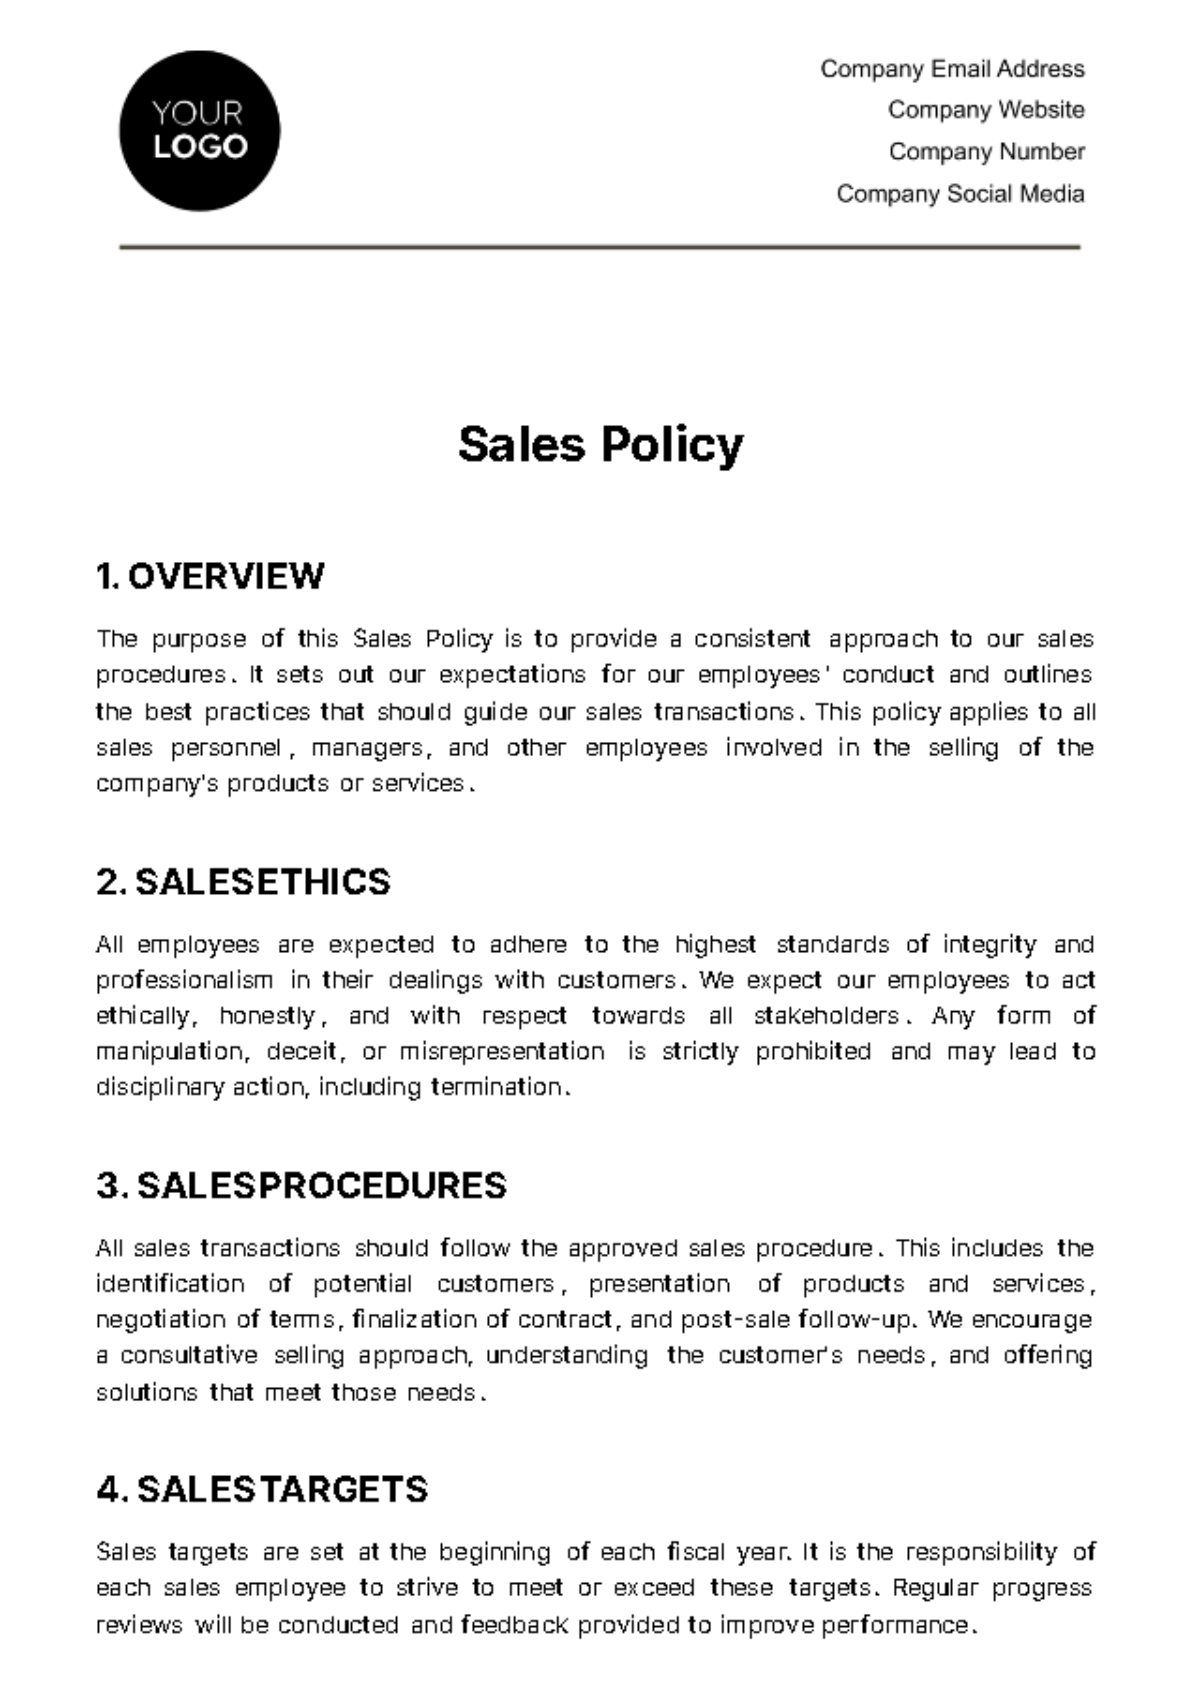 Sales Policy Template